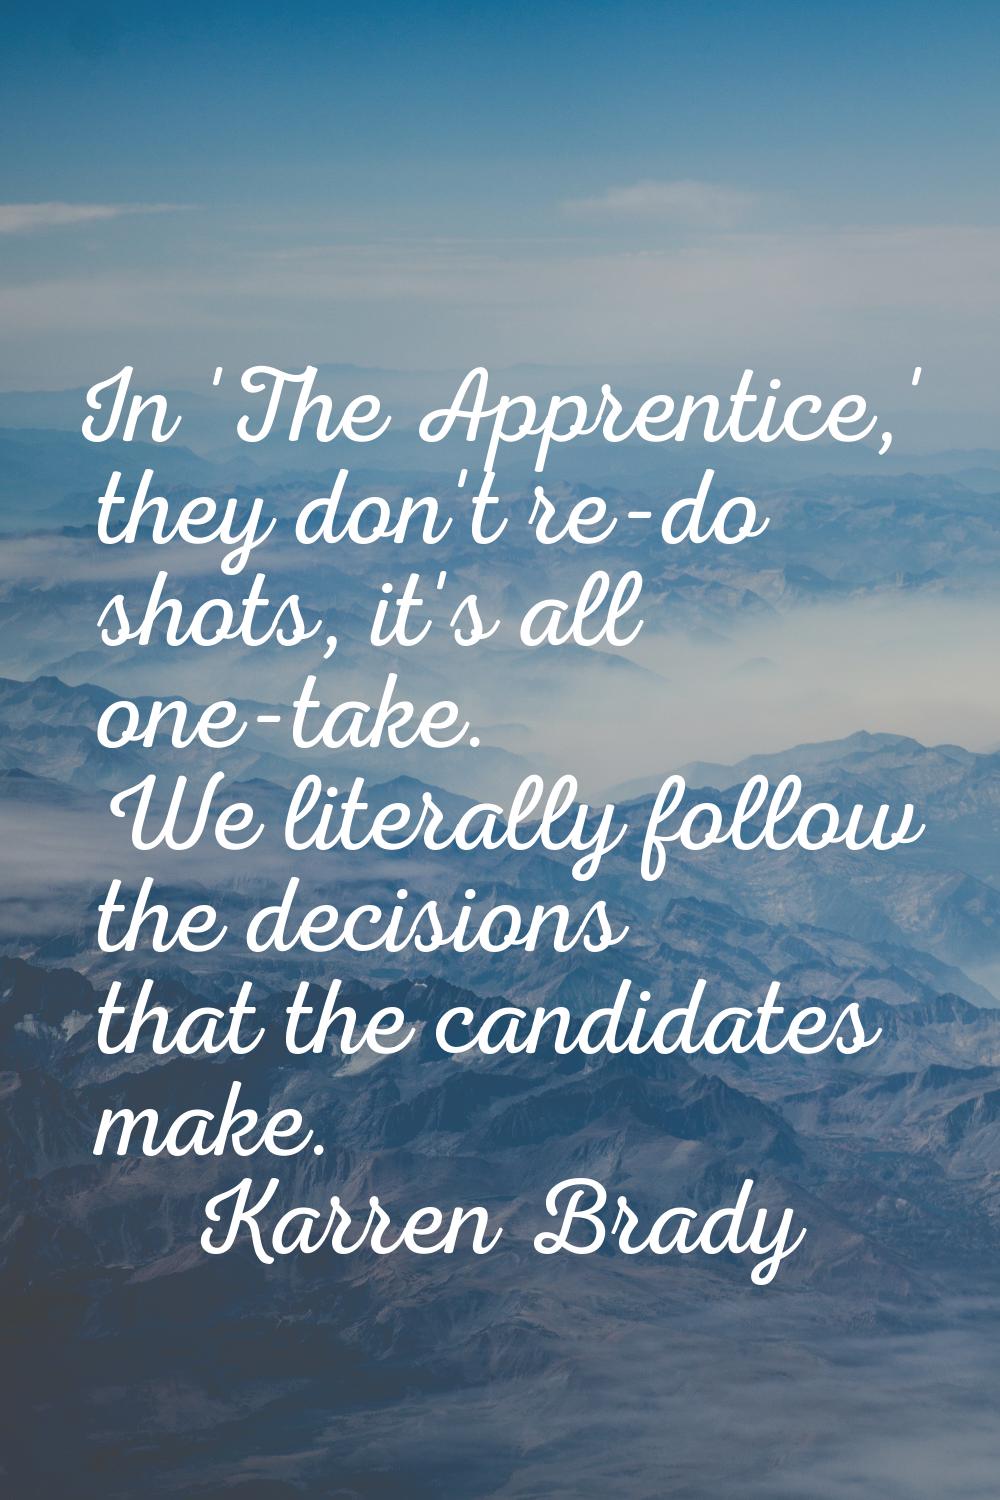 In 'The Apprentice,' they don't re-do shots, it's all one-take. We literally follow the decisions t